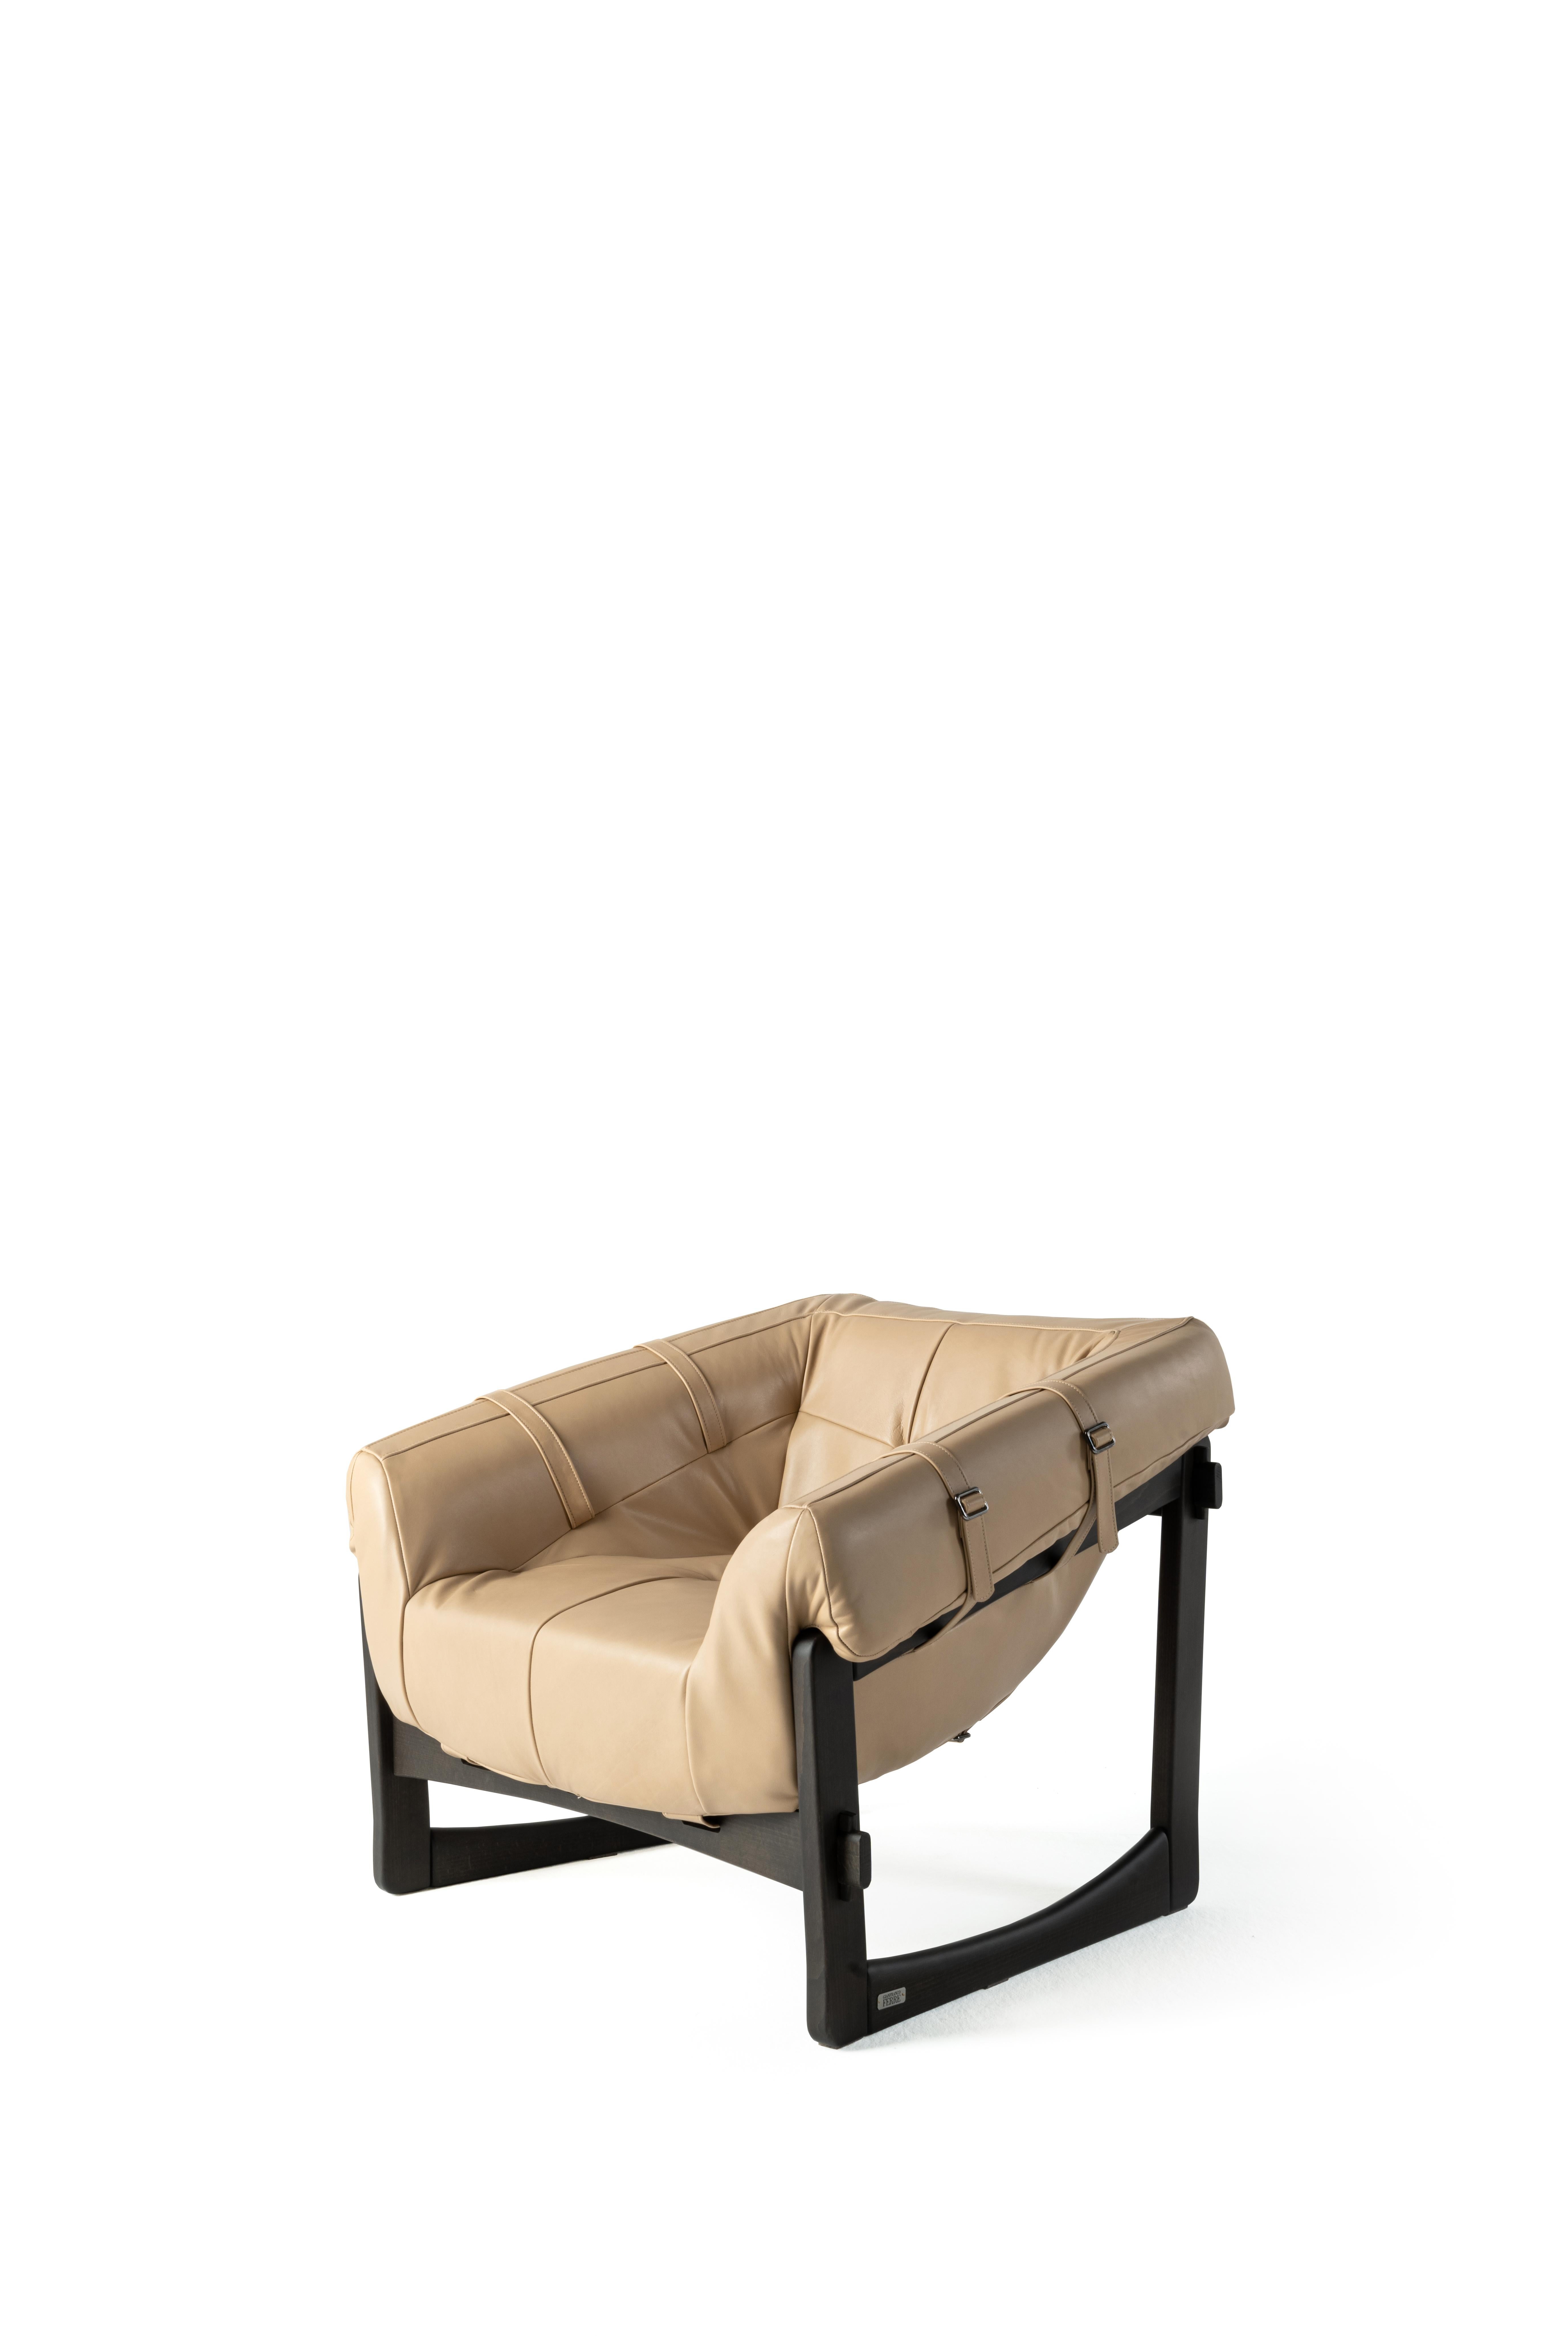 Vintage inspiration with a revisited Brazilian style for Madison armchair. The soft and enveloping shape and the structural belts that guarantee the comfort of the seat make the armchair a relaxing piece of furniture. With its bold character, the